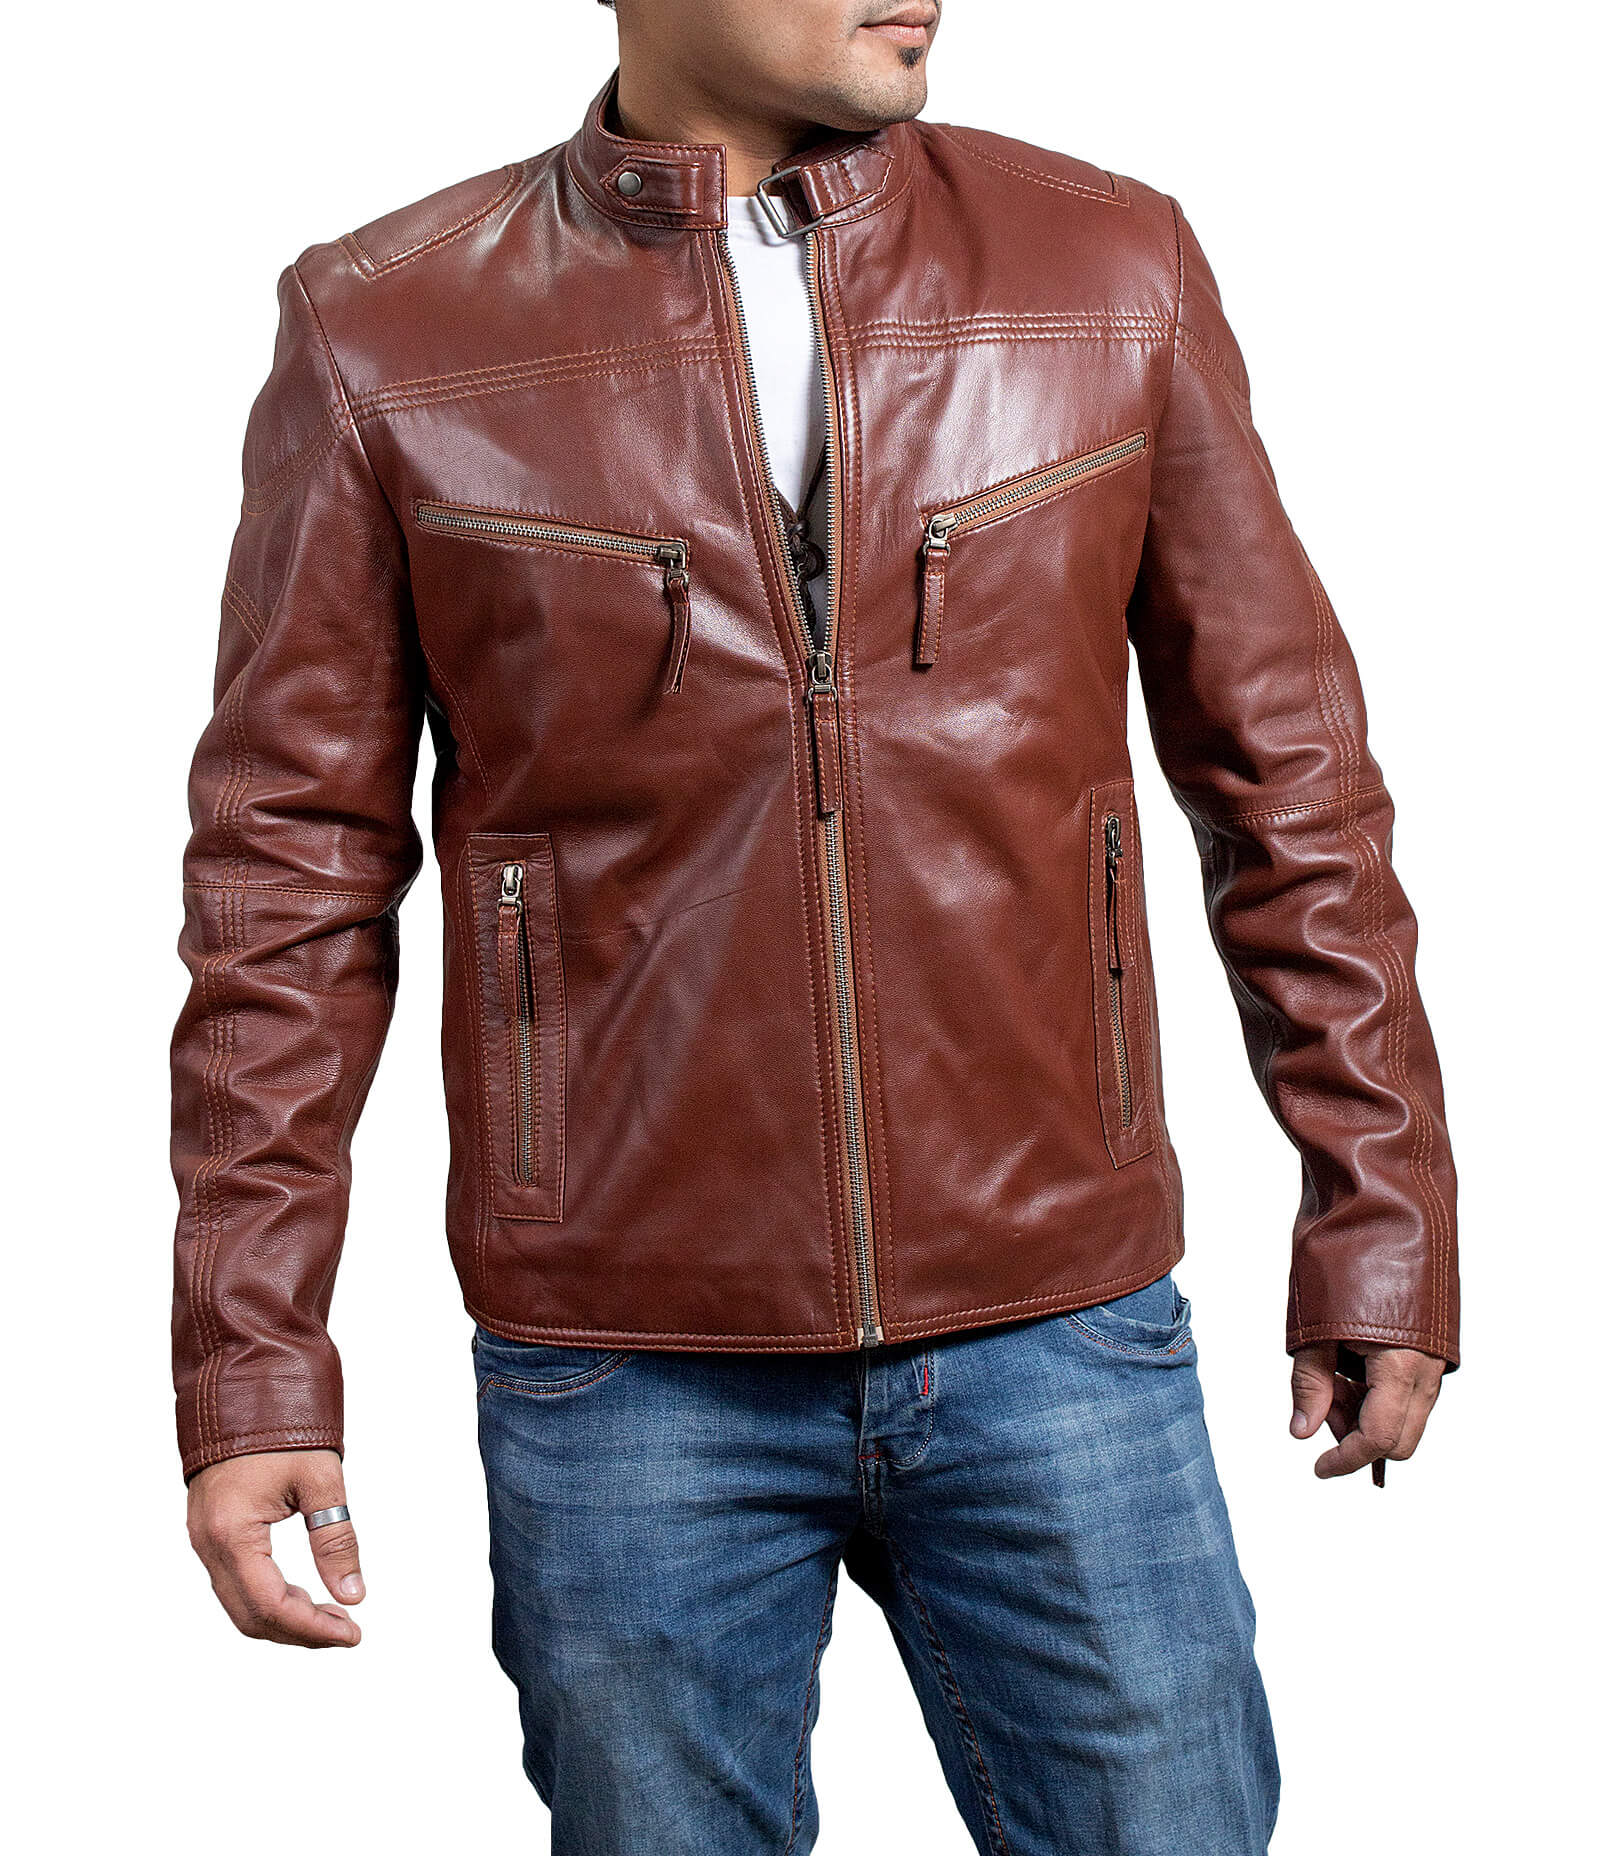 Xtreme Brown Leather Motorcycle Jacket on Sale | XtremeJackets